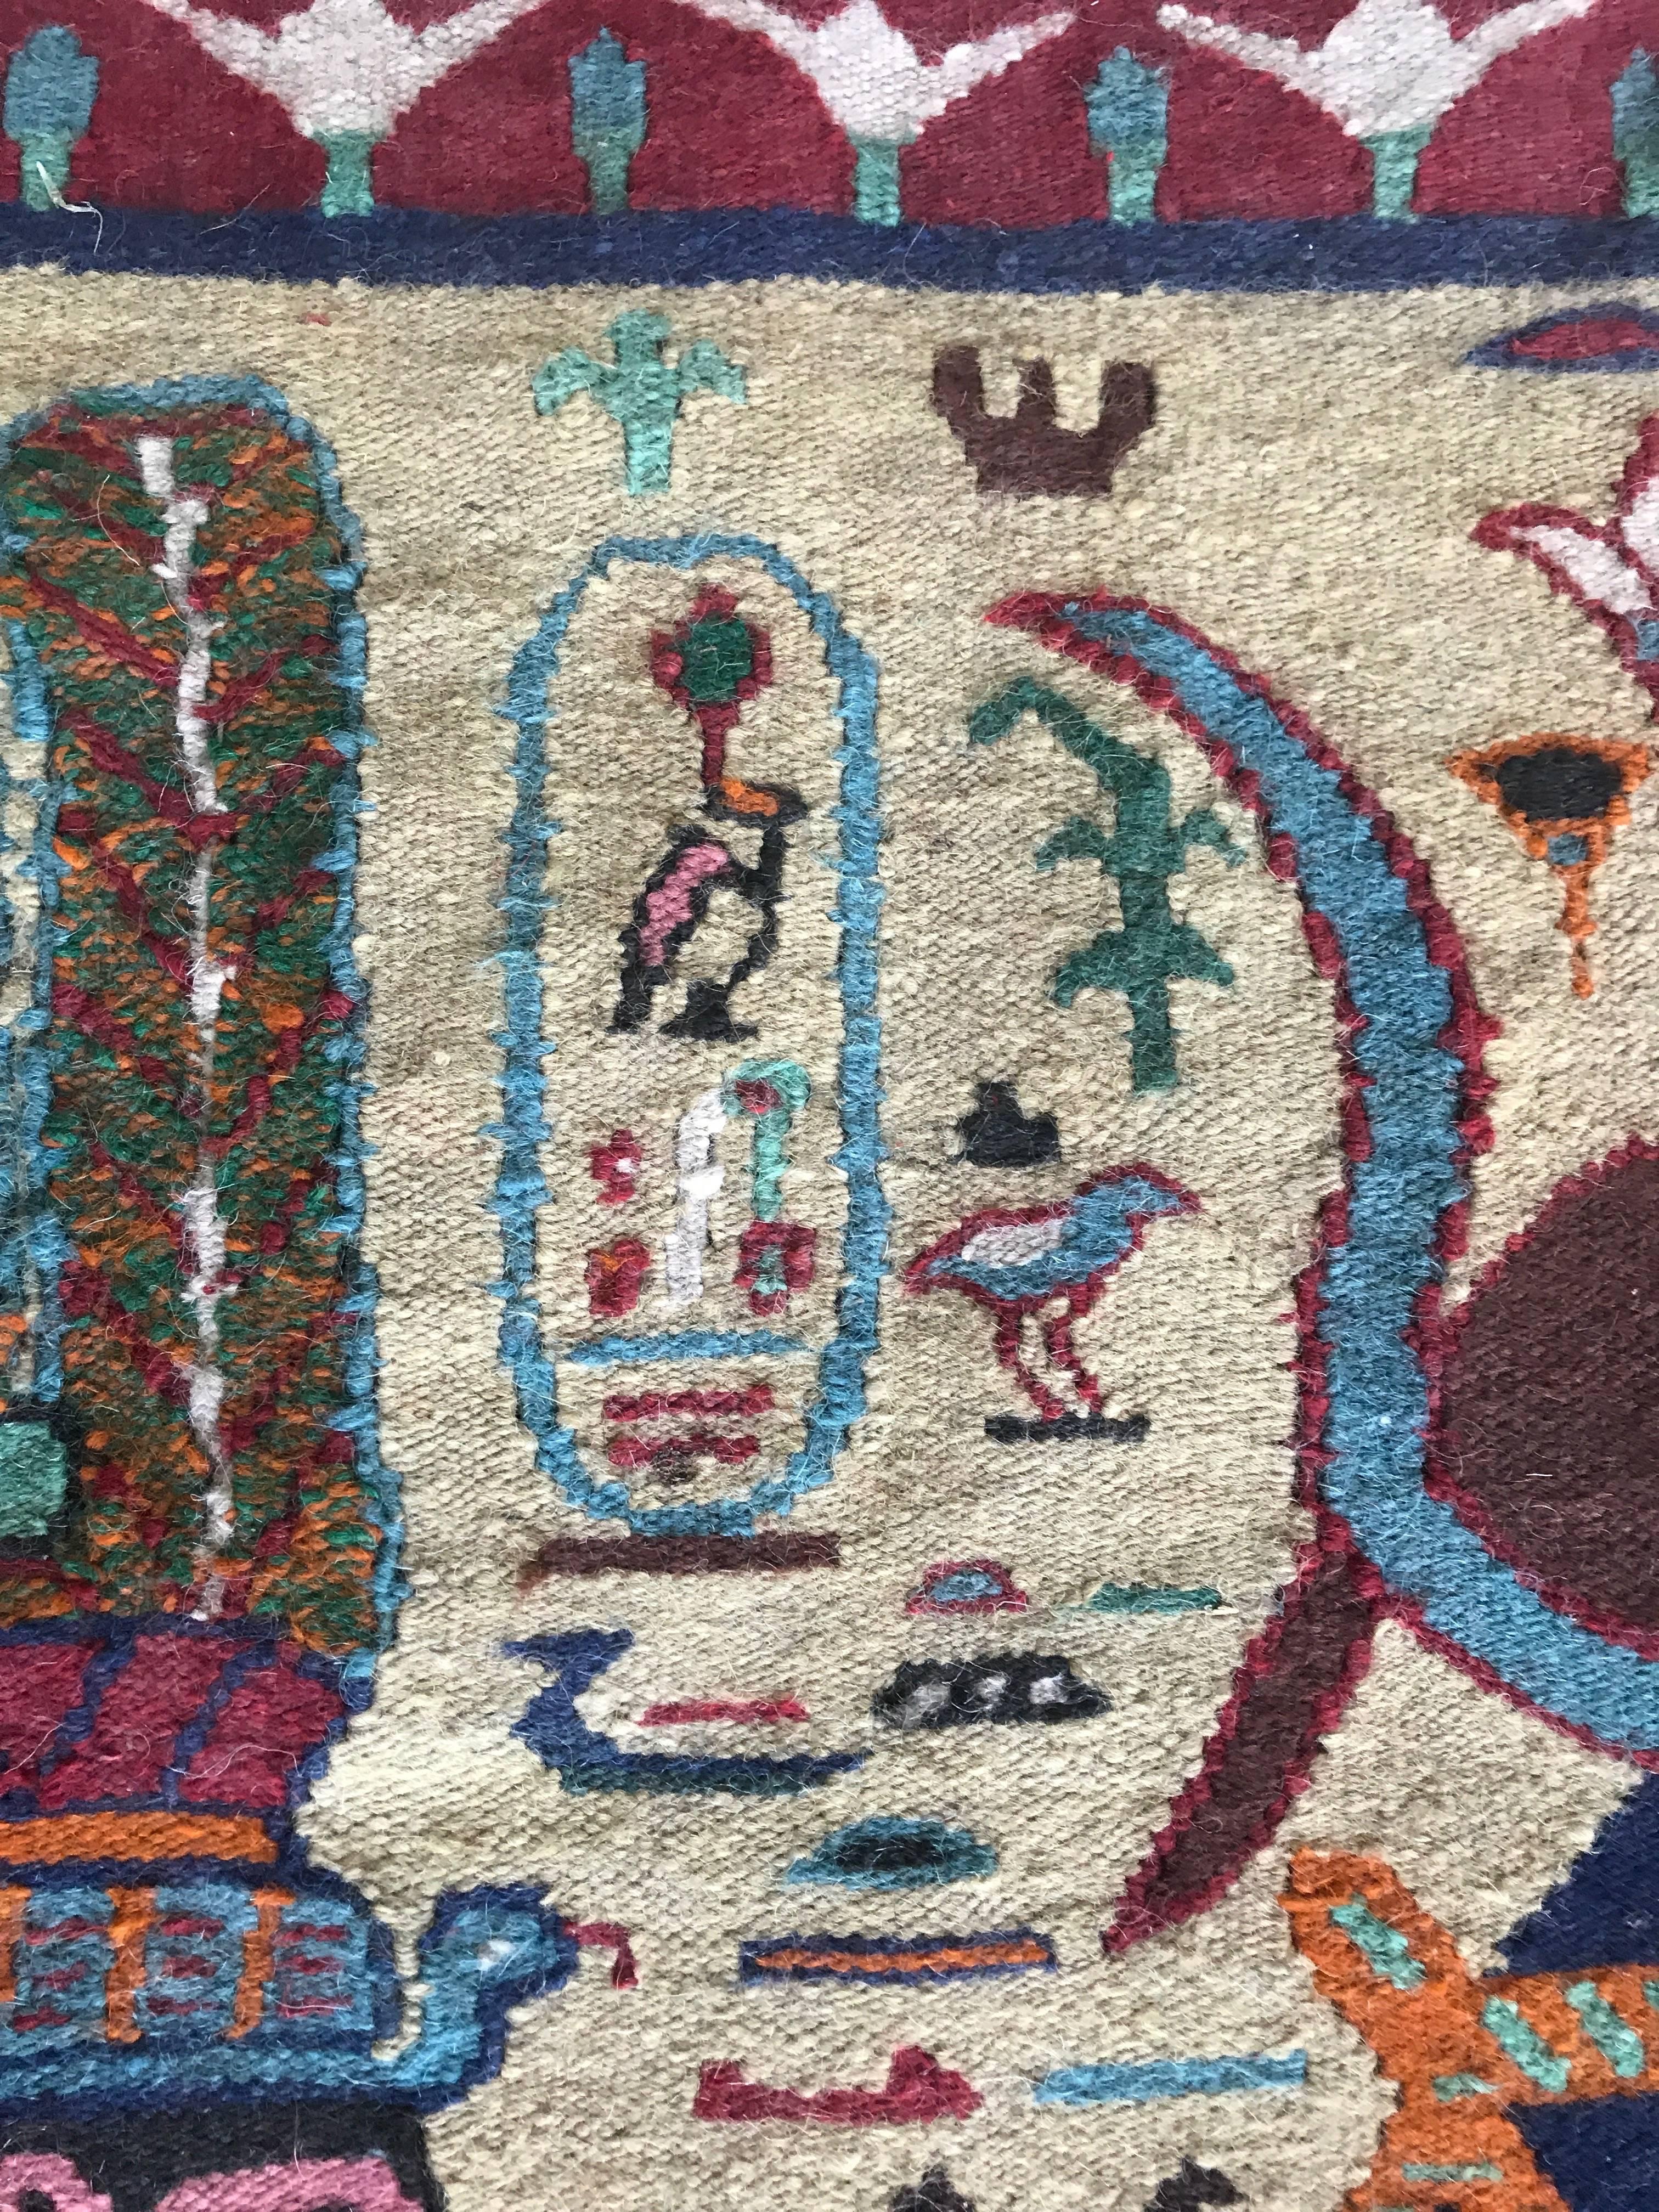 Wool Early 20th Century Egyptian Revival Hand-Knotted Carpet / Tapestry Isis & Hathor